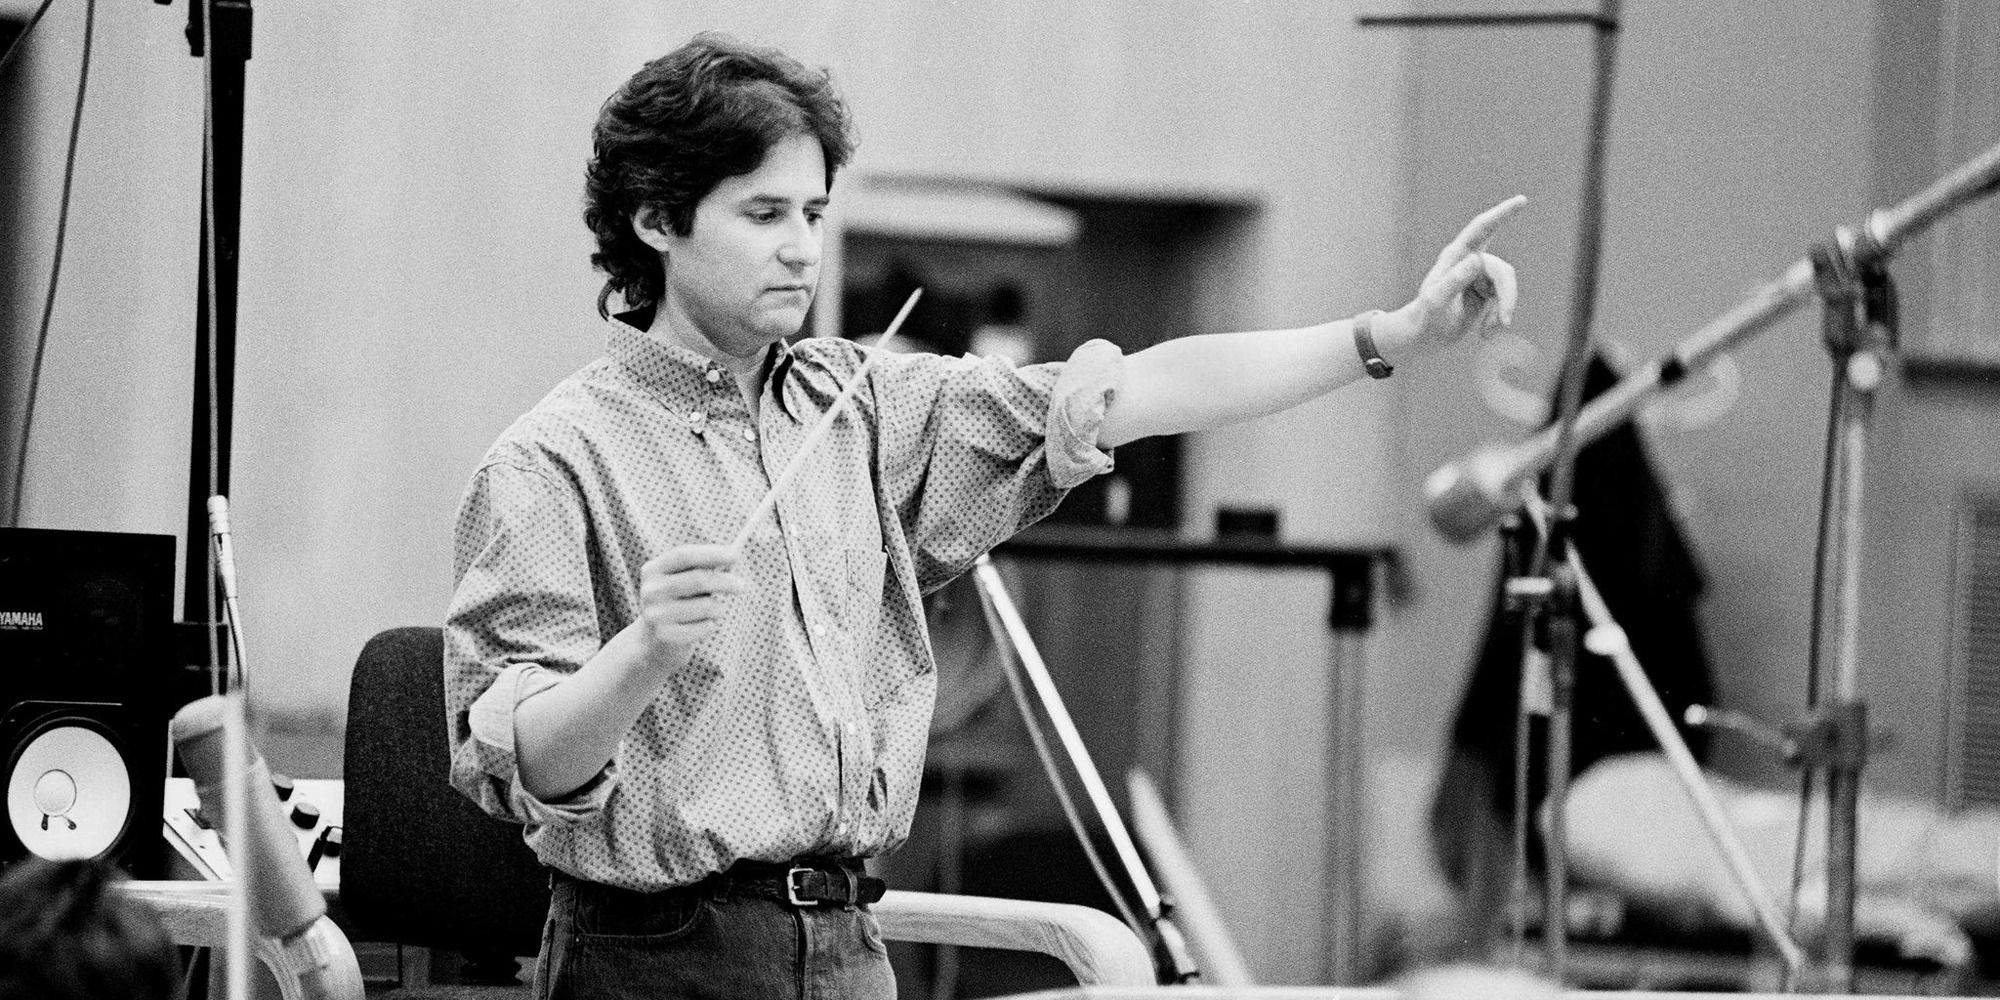 James Horner conducting in a studio, in black and white